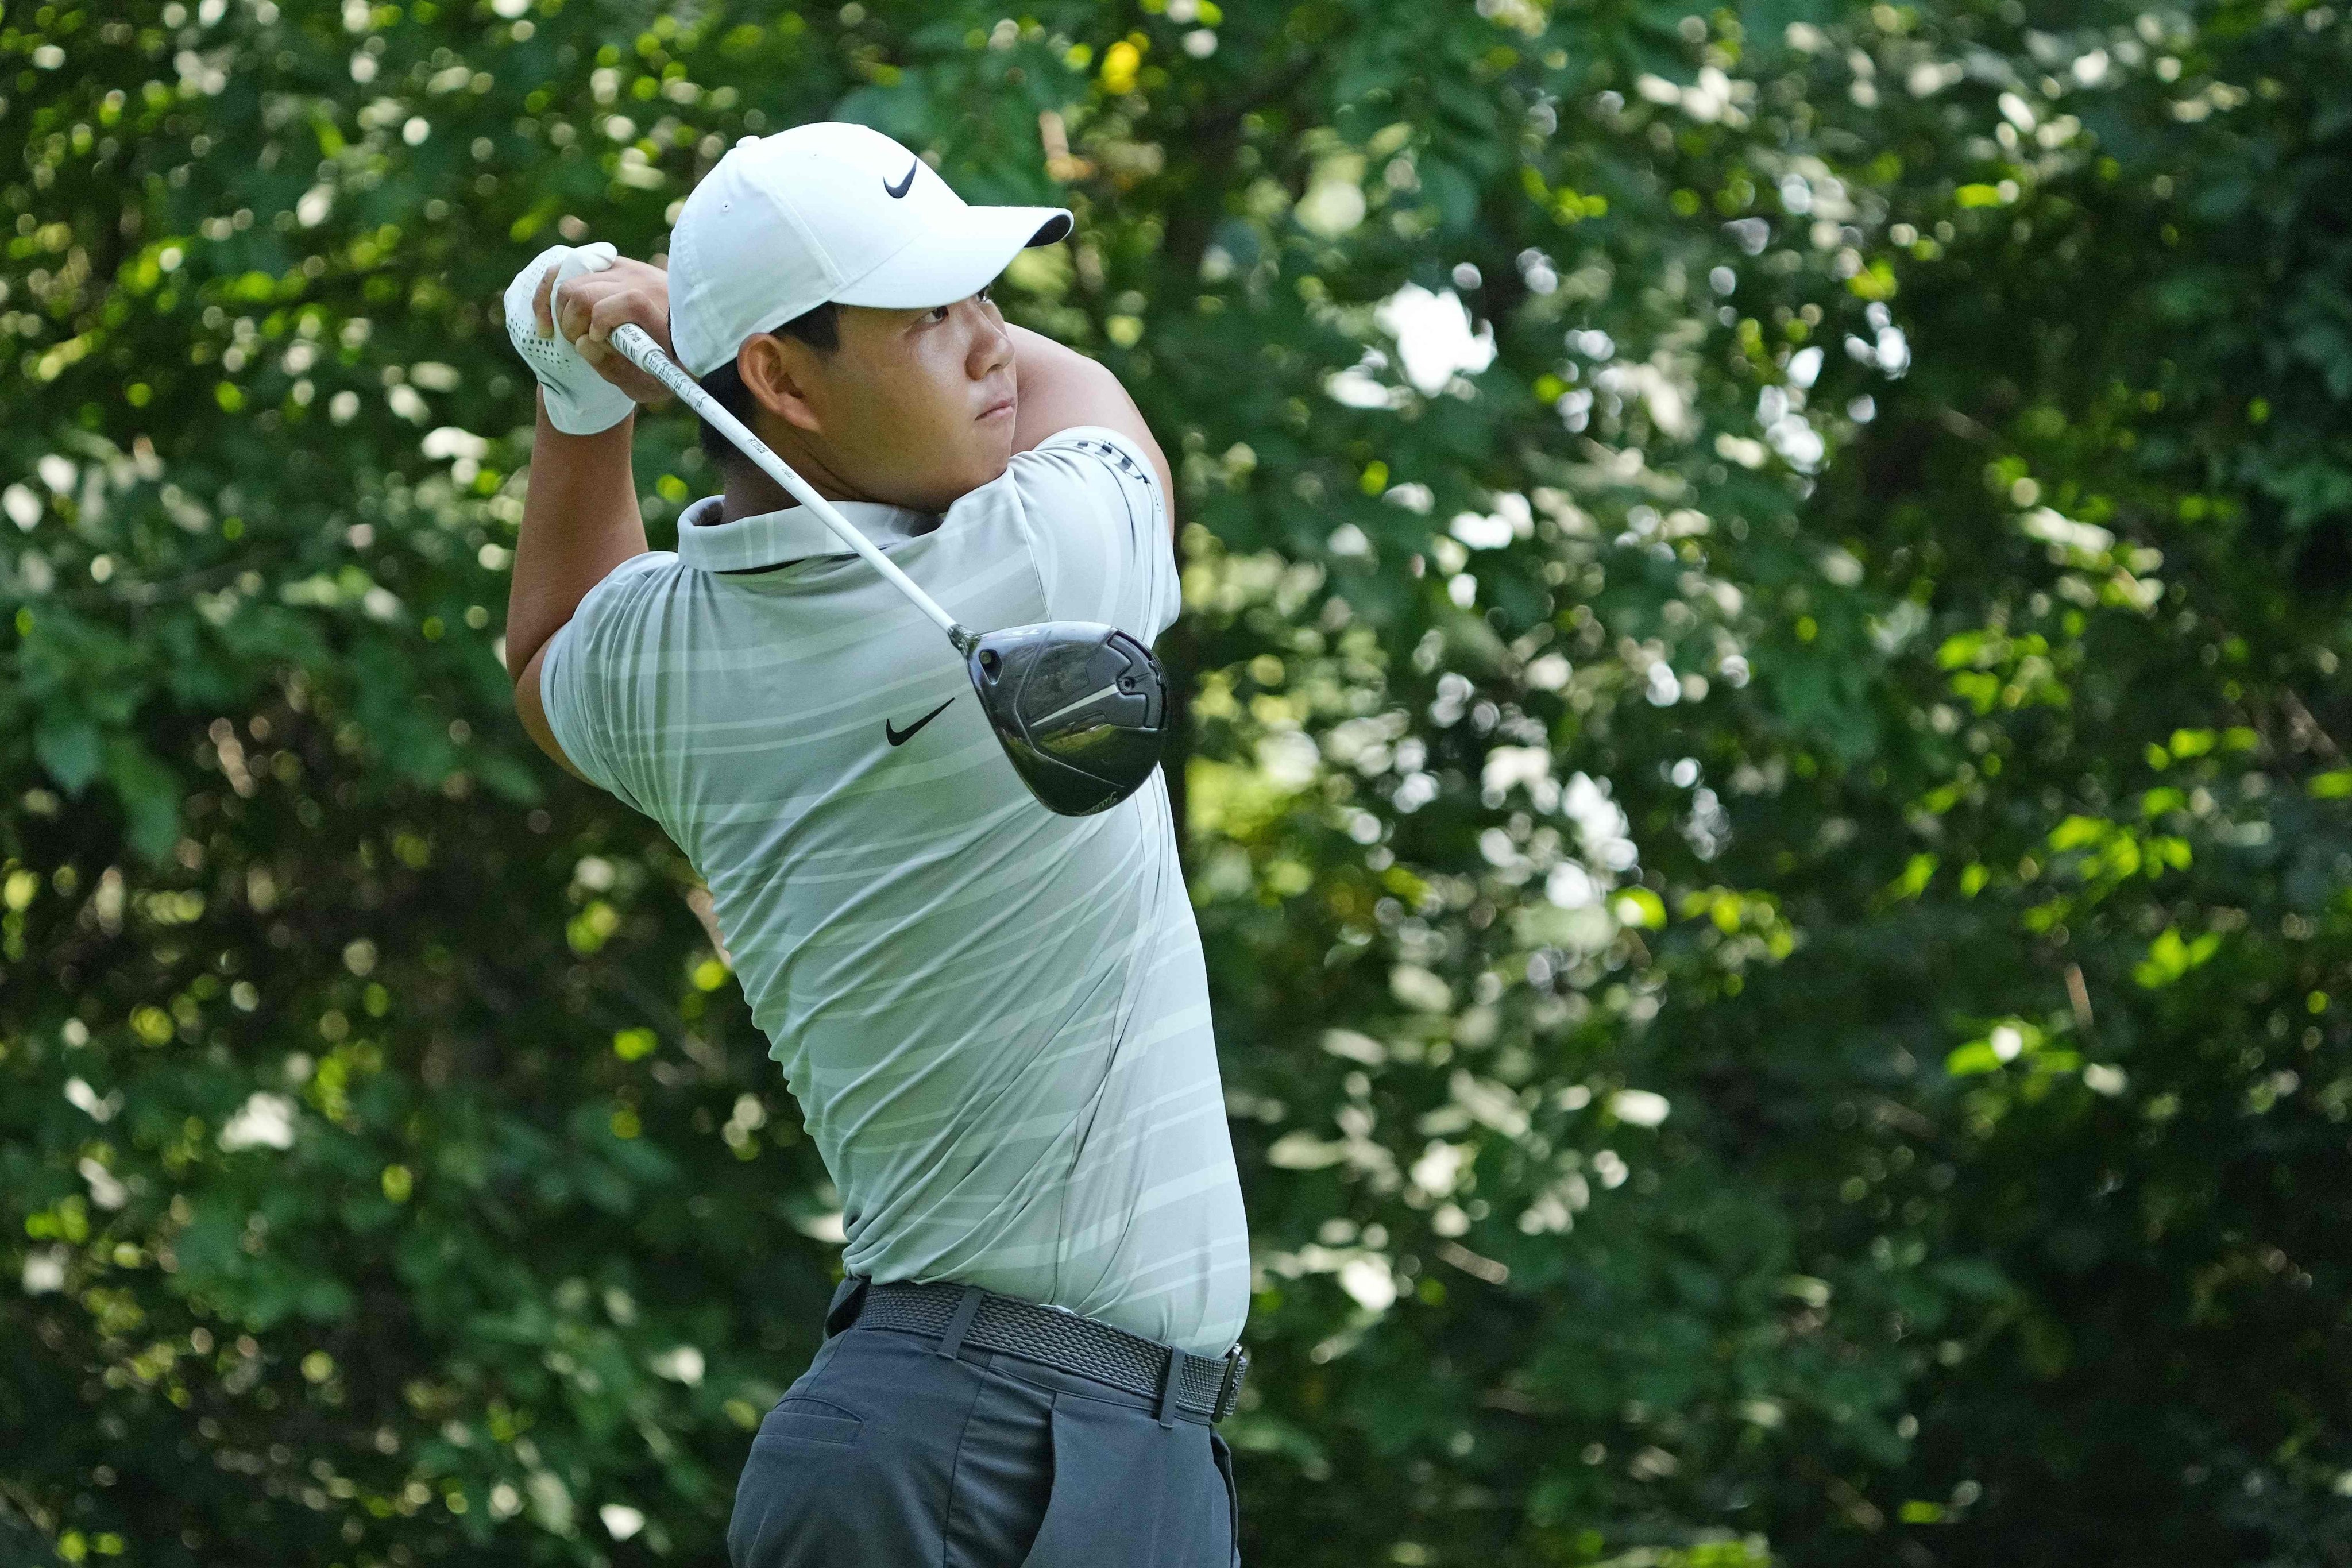 Tom Kim of South Korea is preparing for his first Tour Championship with potential to become the youngest winner. Photo: Getty Images via AFP